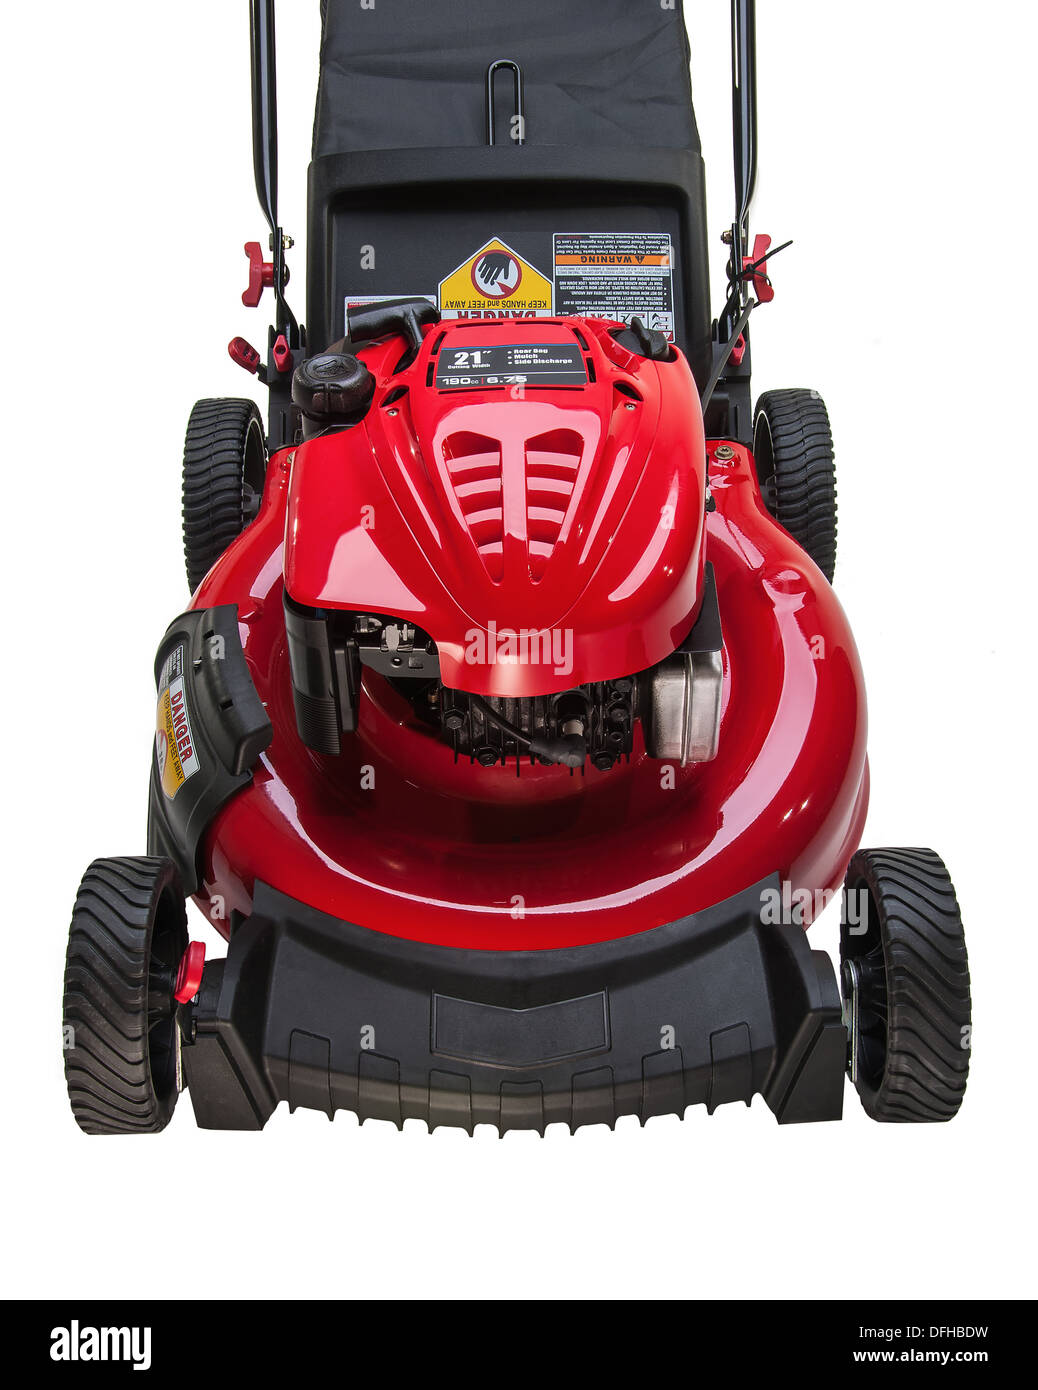 Red Lawn mower on white background Stock Photo